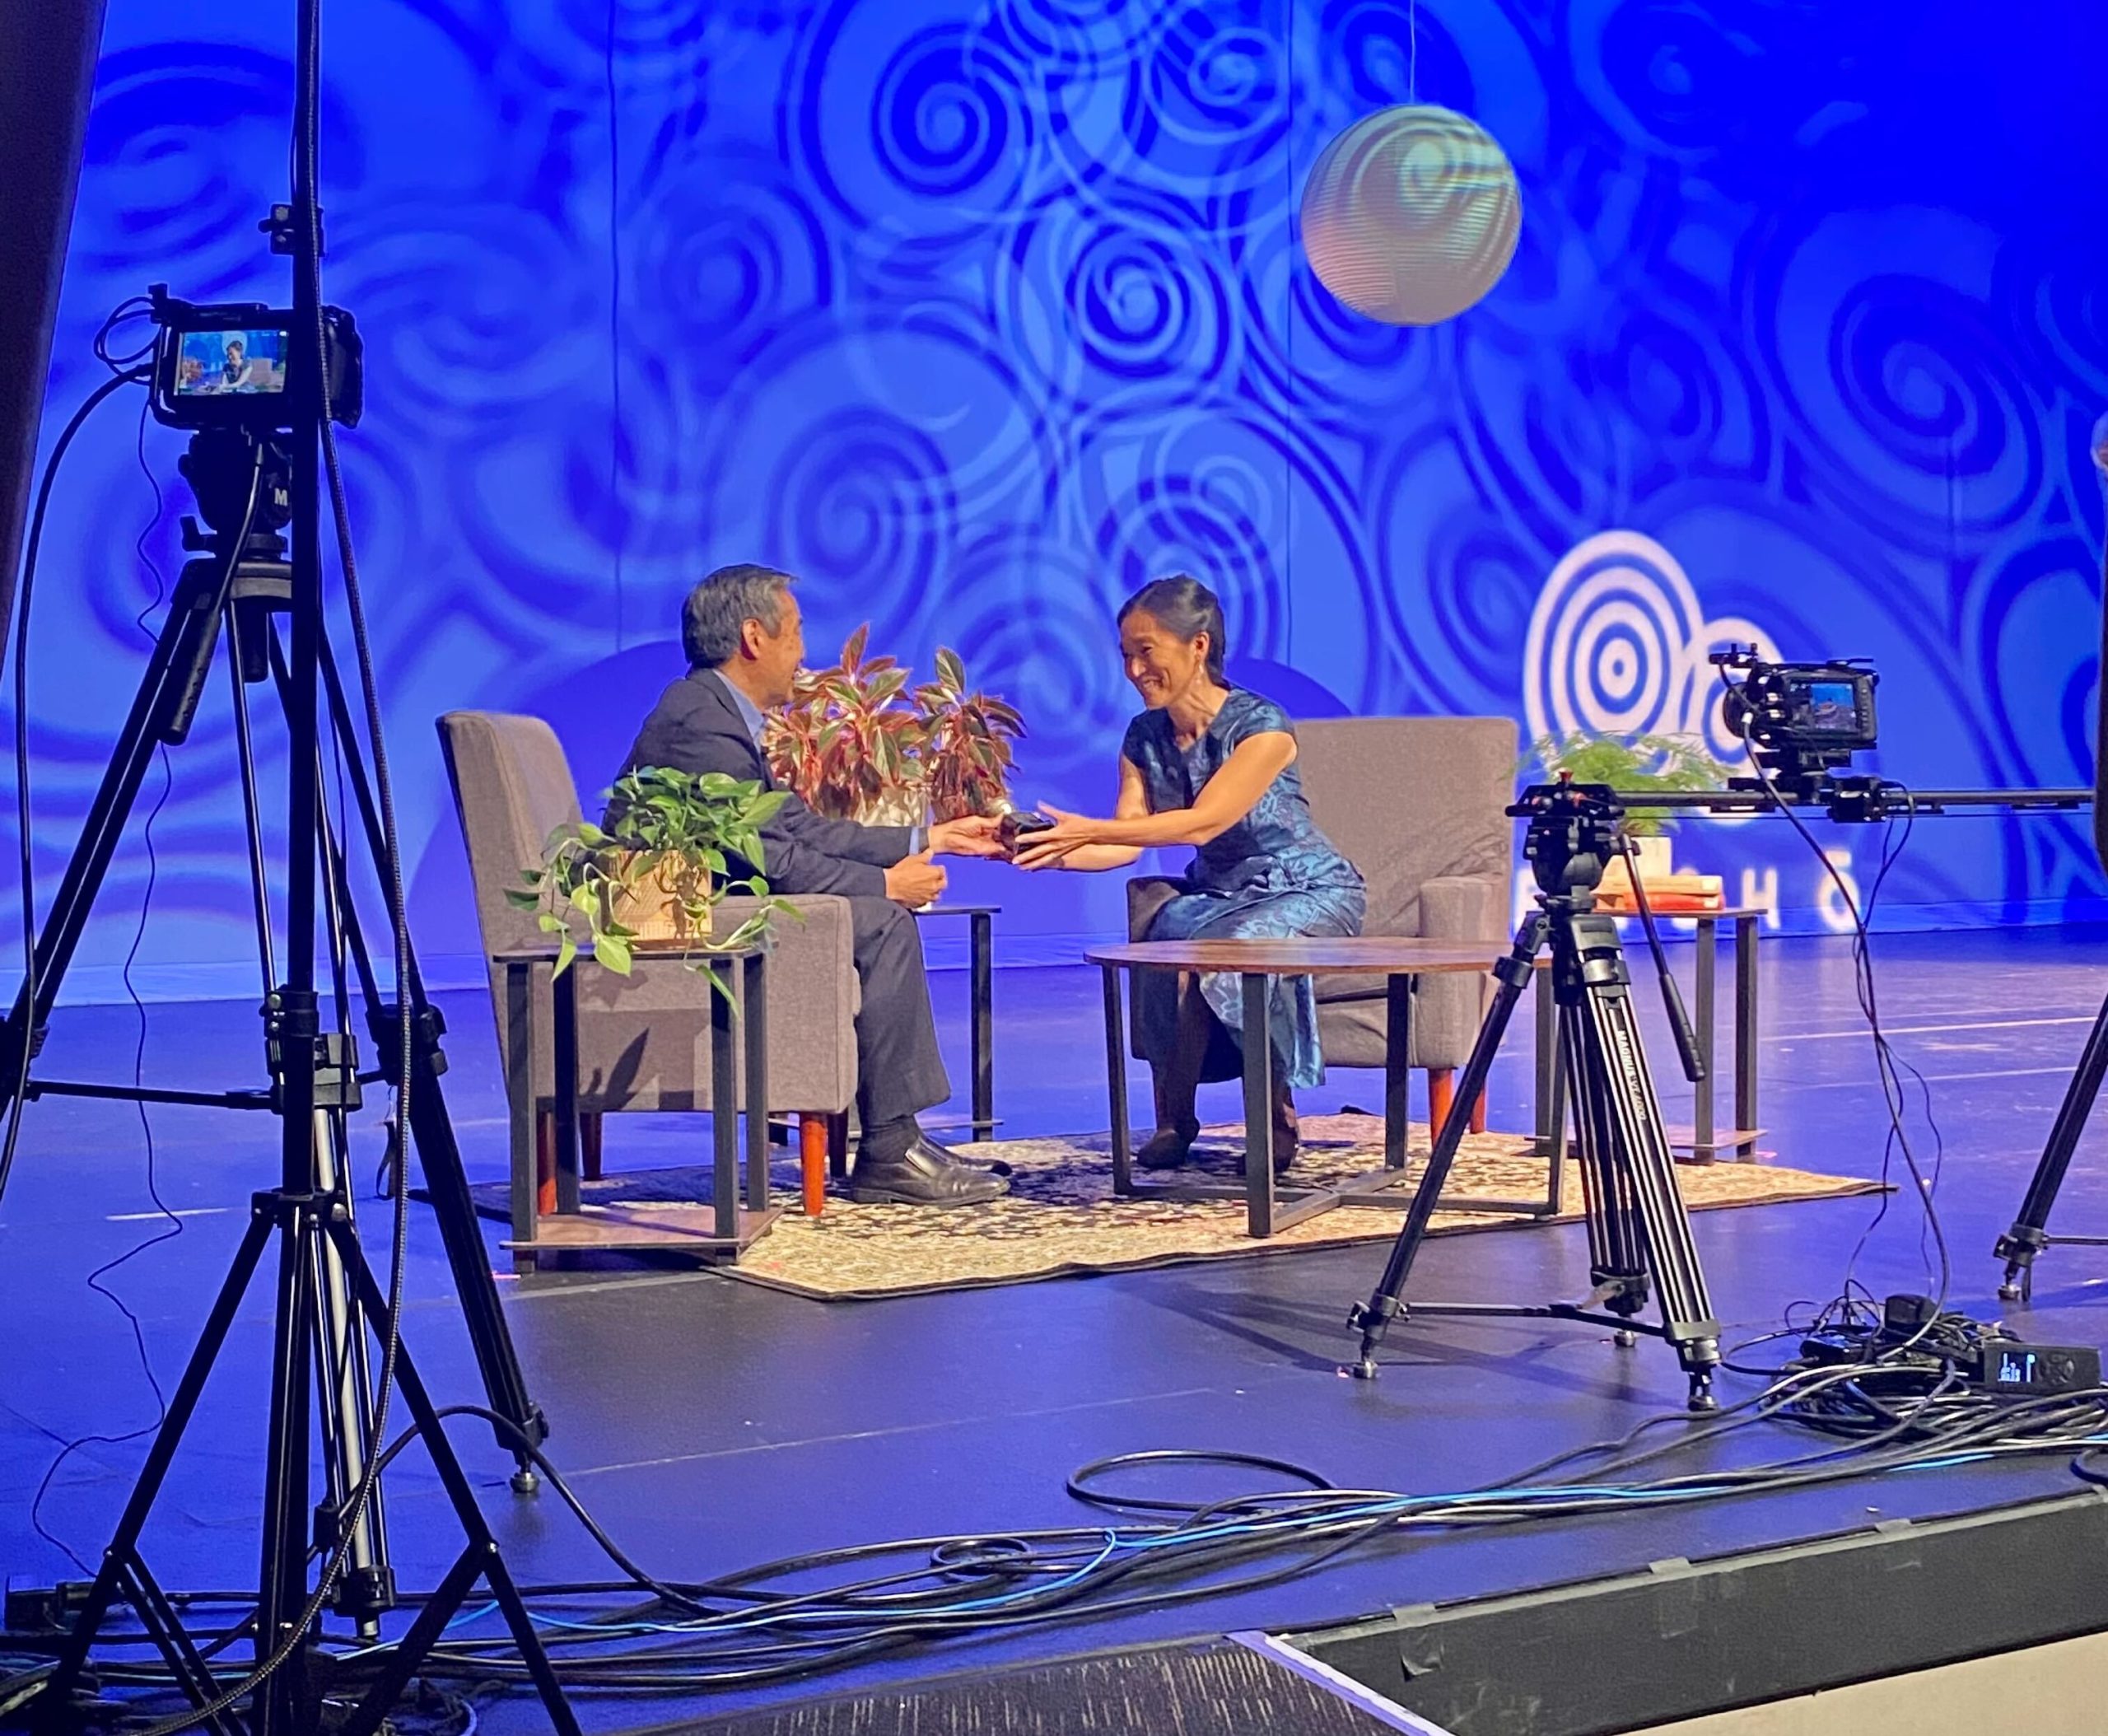 Tom Ikeda and Naomi Ostwald Kawamura in conversation seated on stage during filming of the Densho Virtual Gala. Ikeda is handing off a baseball trophy to Naomi that was gifted to him by a Nisei community leader when he first started at Densho.